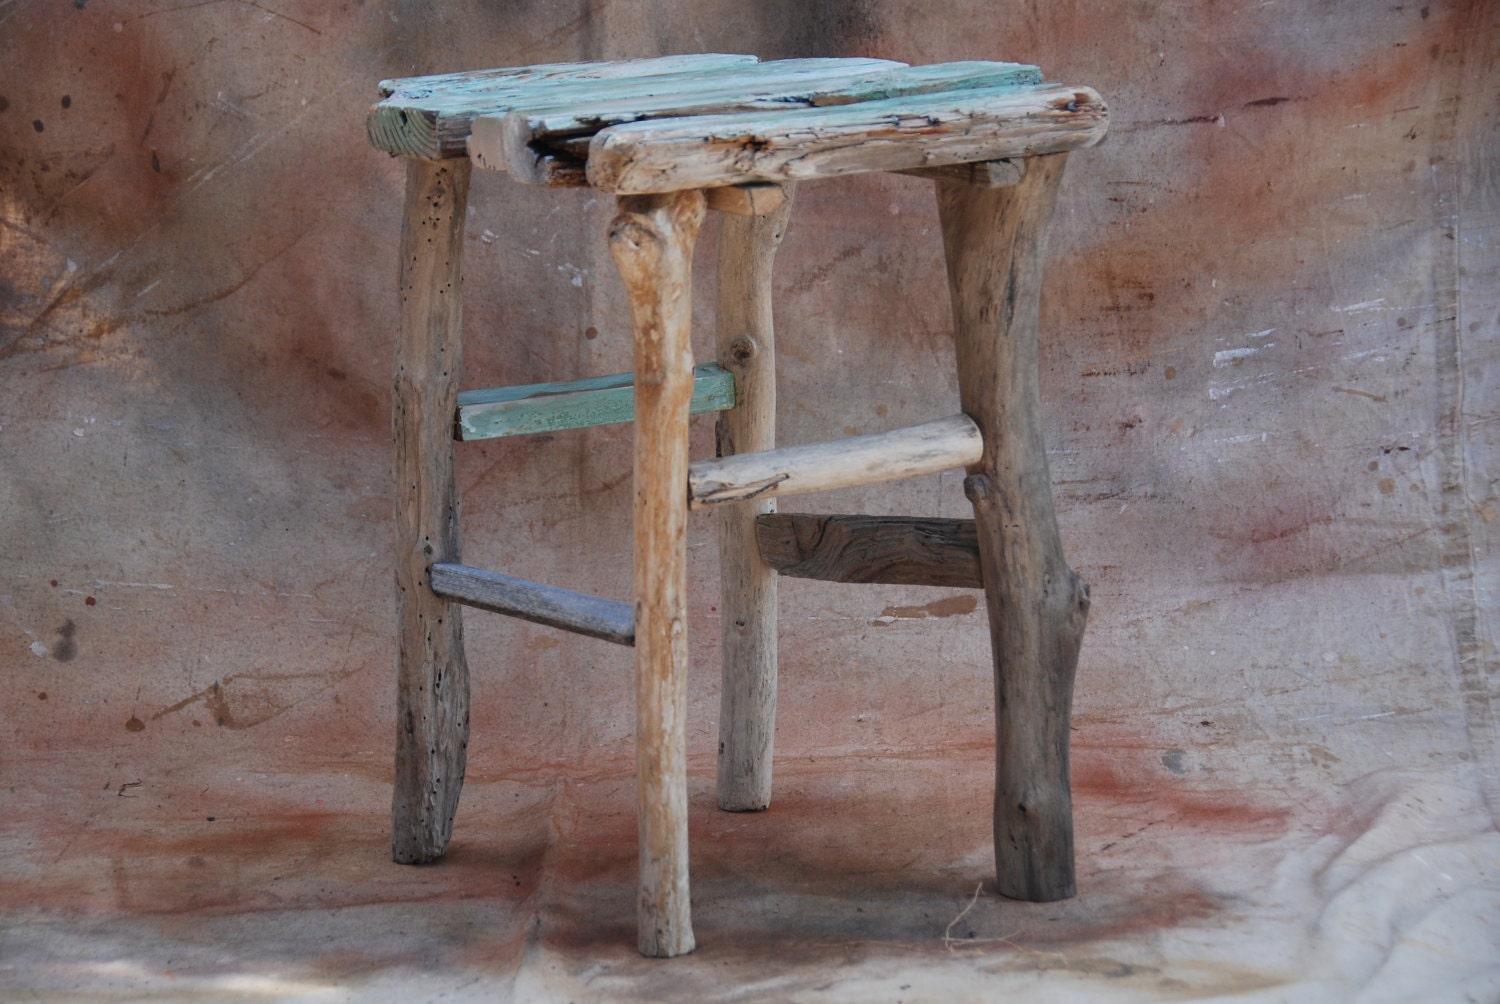 Driftwood side-table/stand - small decorative shabby-chic driftwood wine table/stand - aqua/green and gold detailed driftwood from Maui